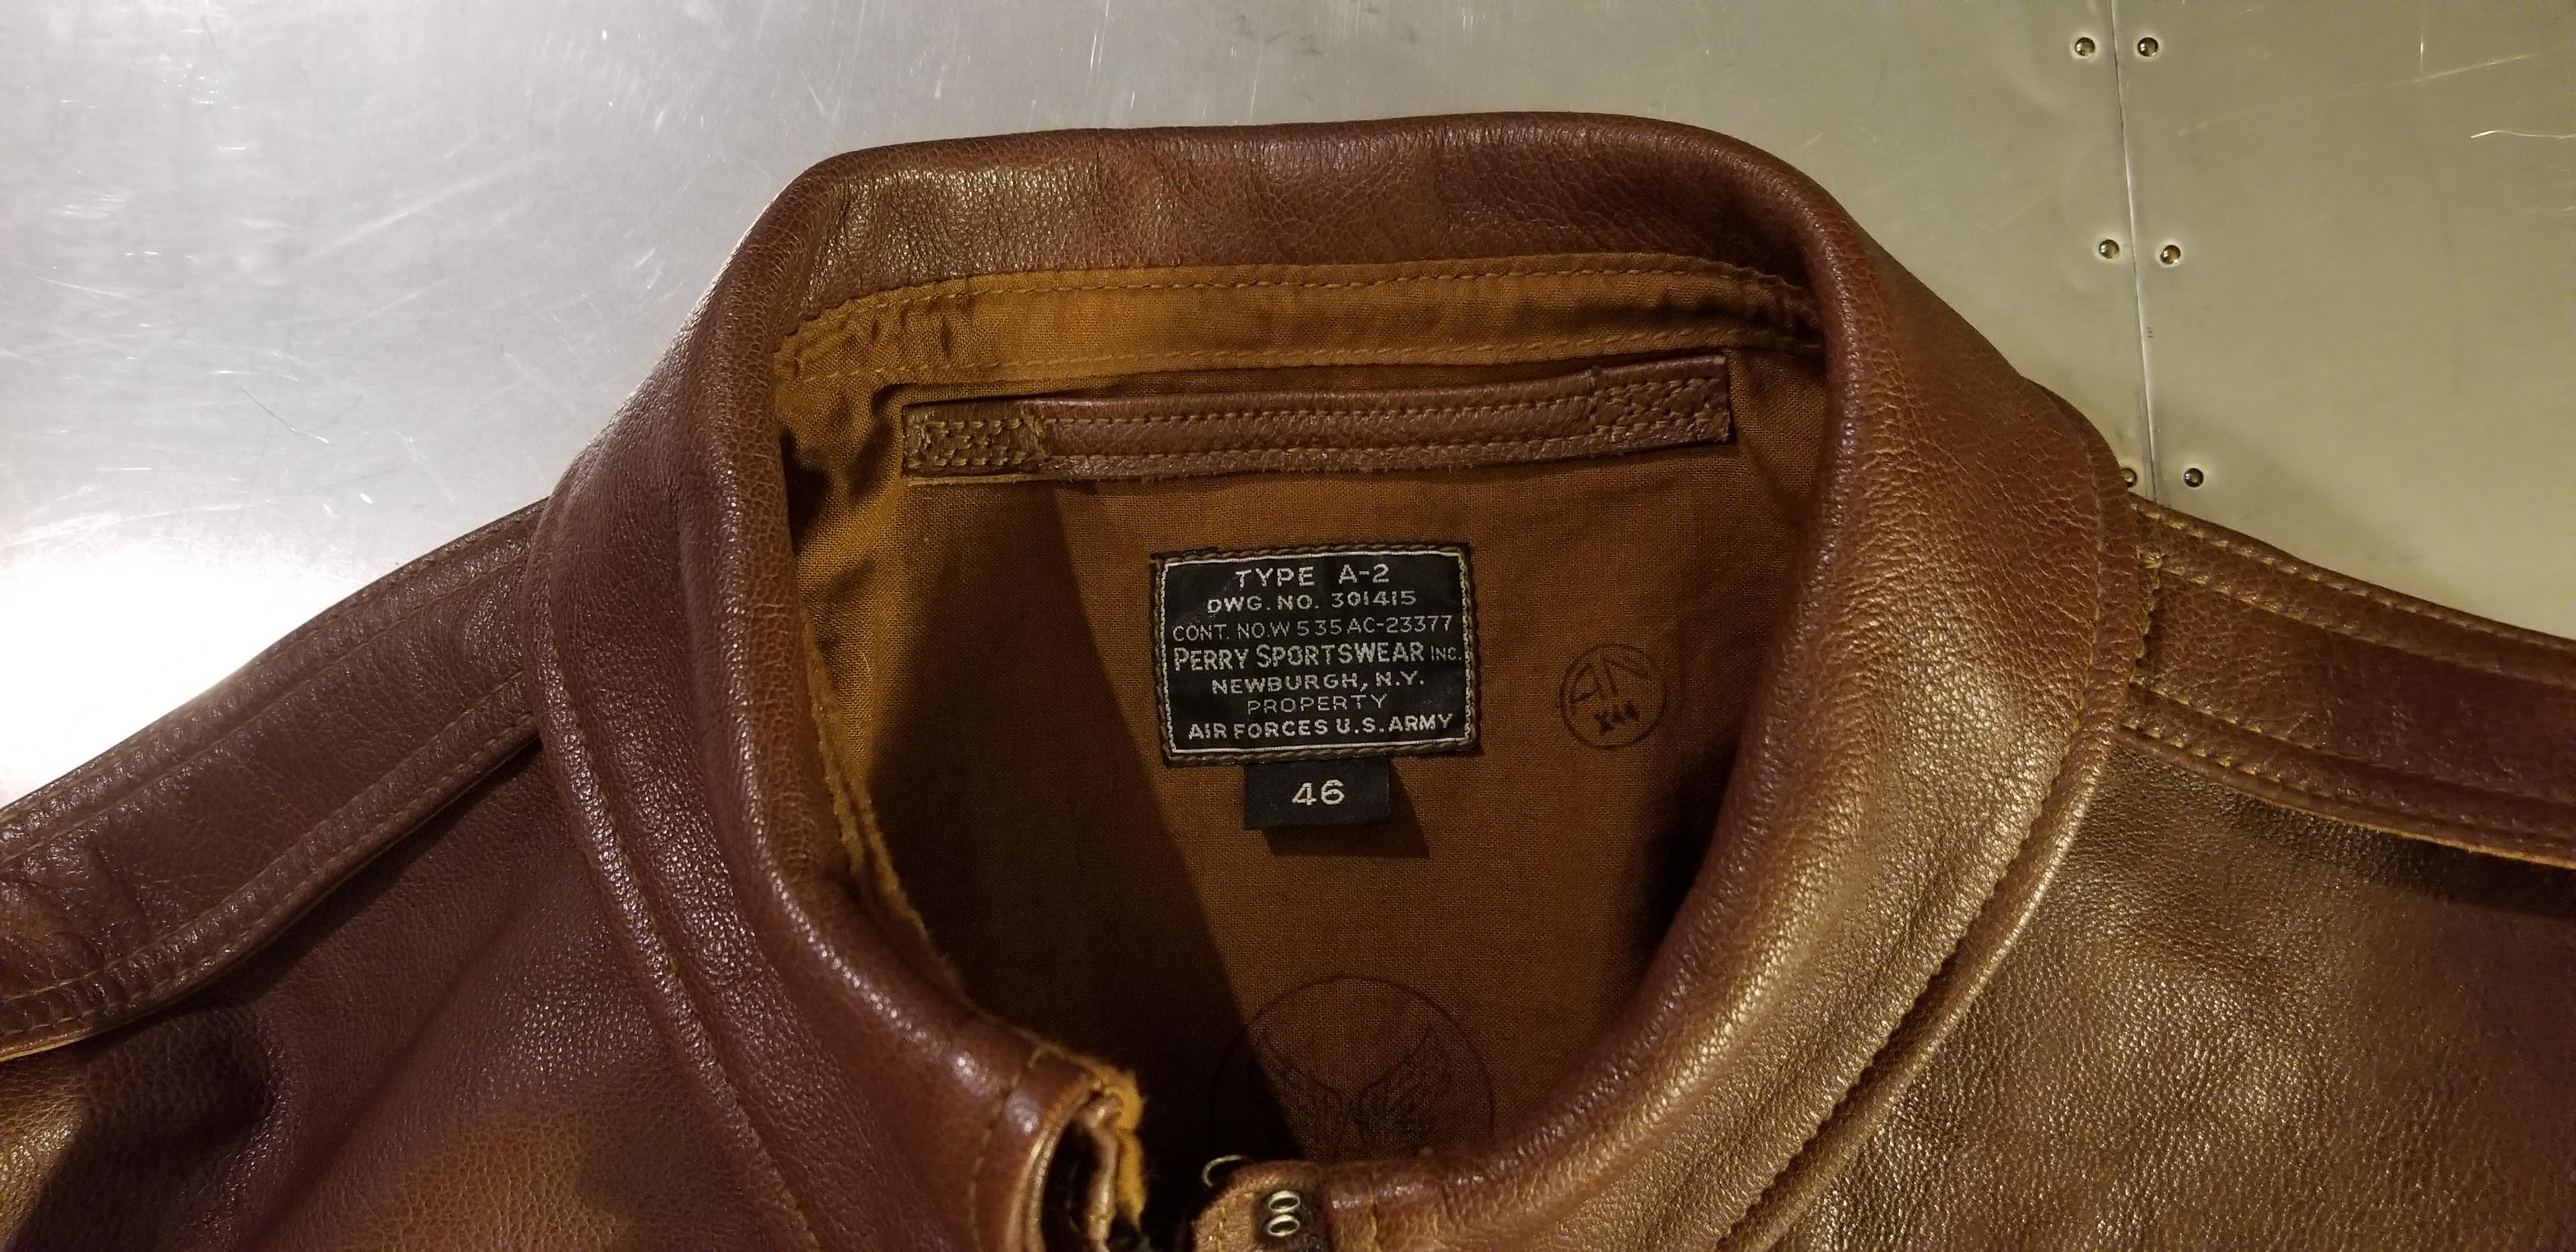 Ebay-Goodwear 38-1711-P Aero Contract A-2, Size 46 | Vintage Leather ...